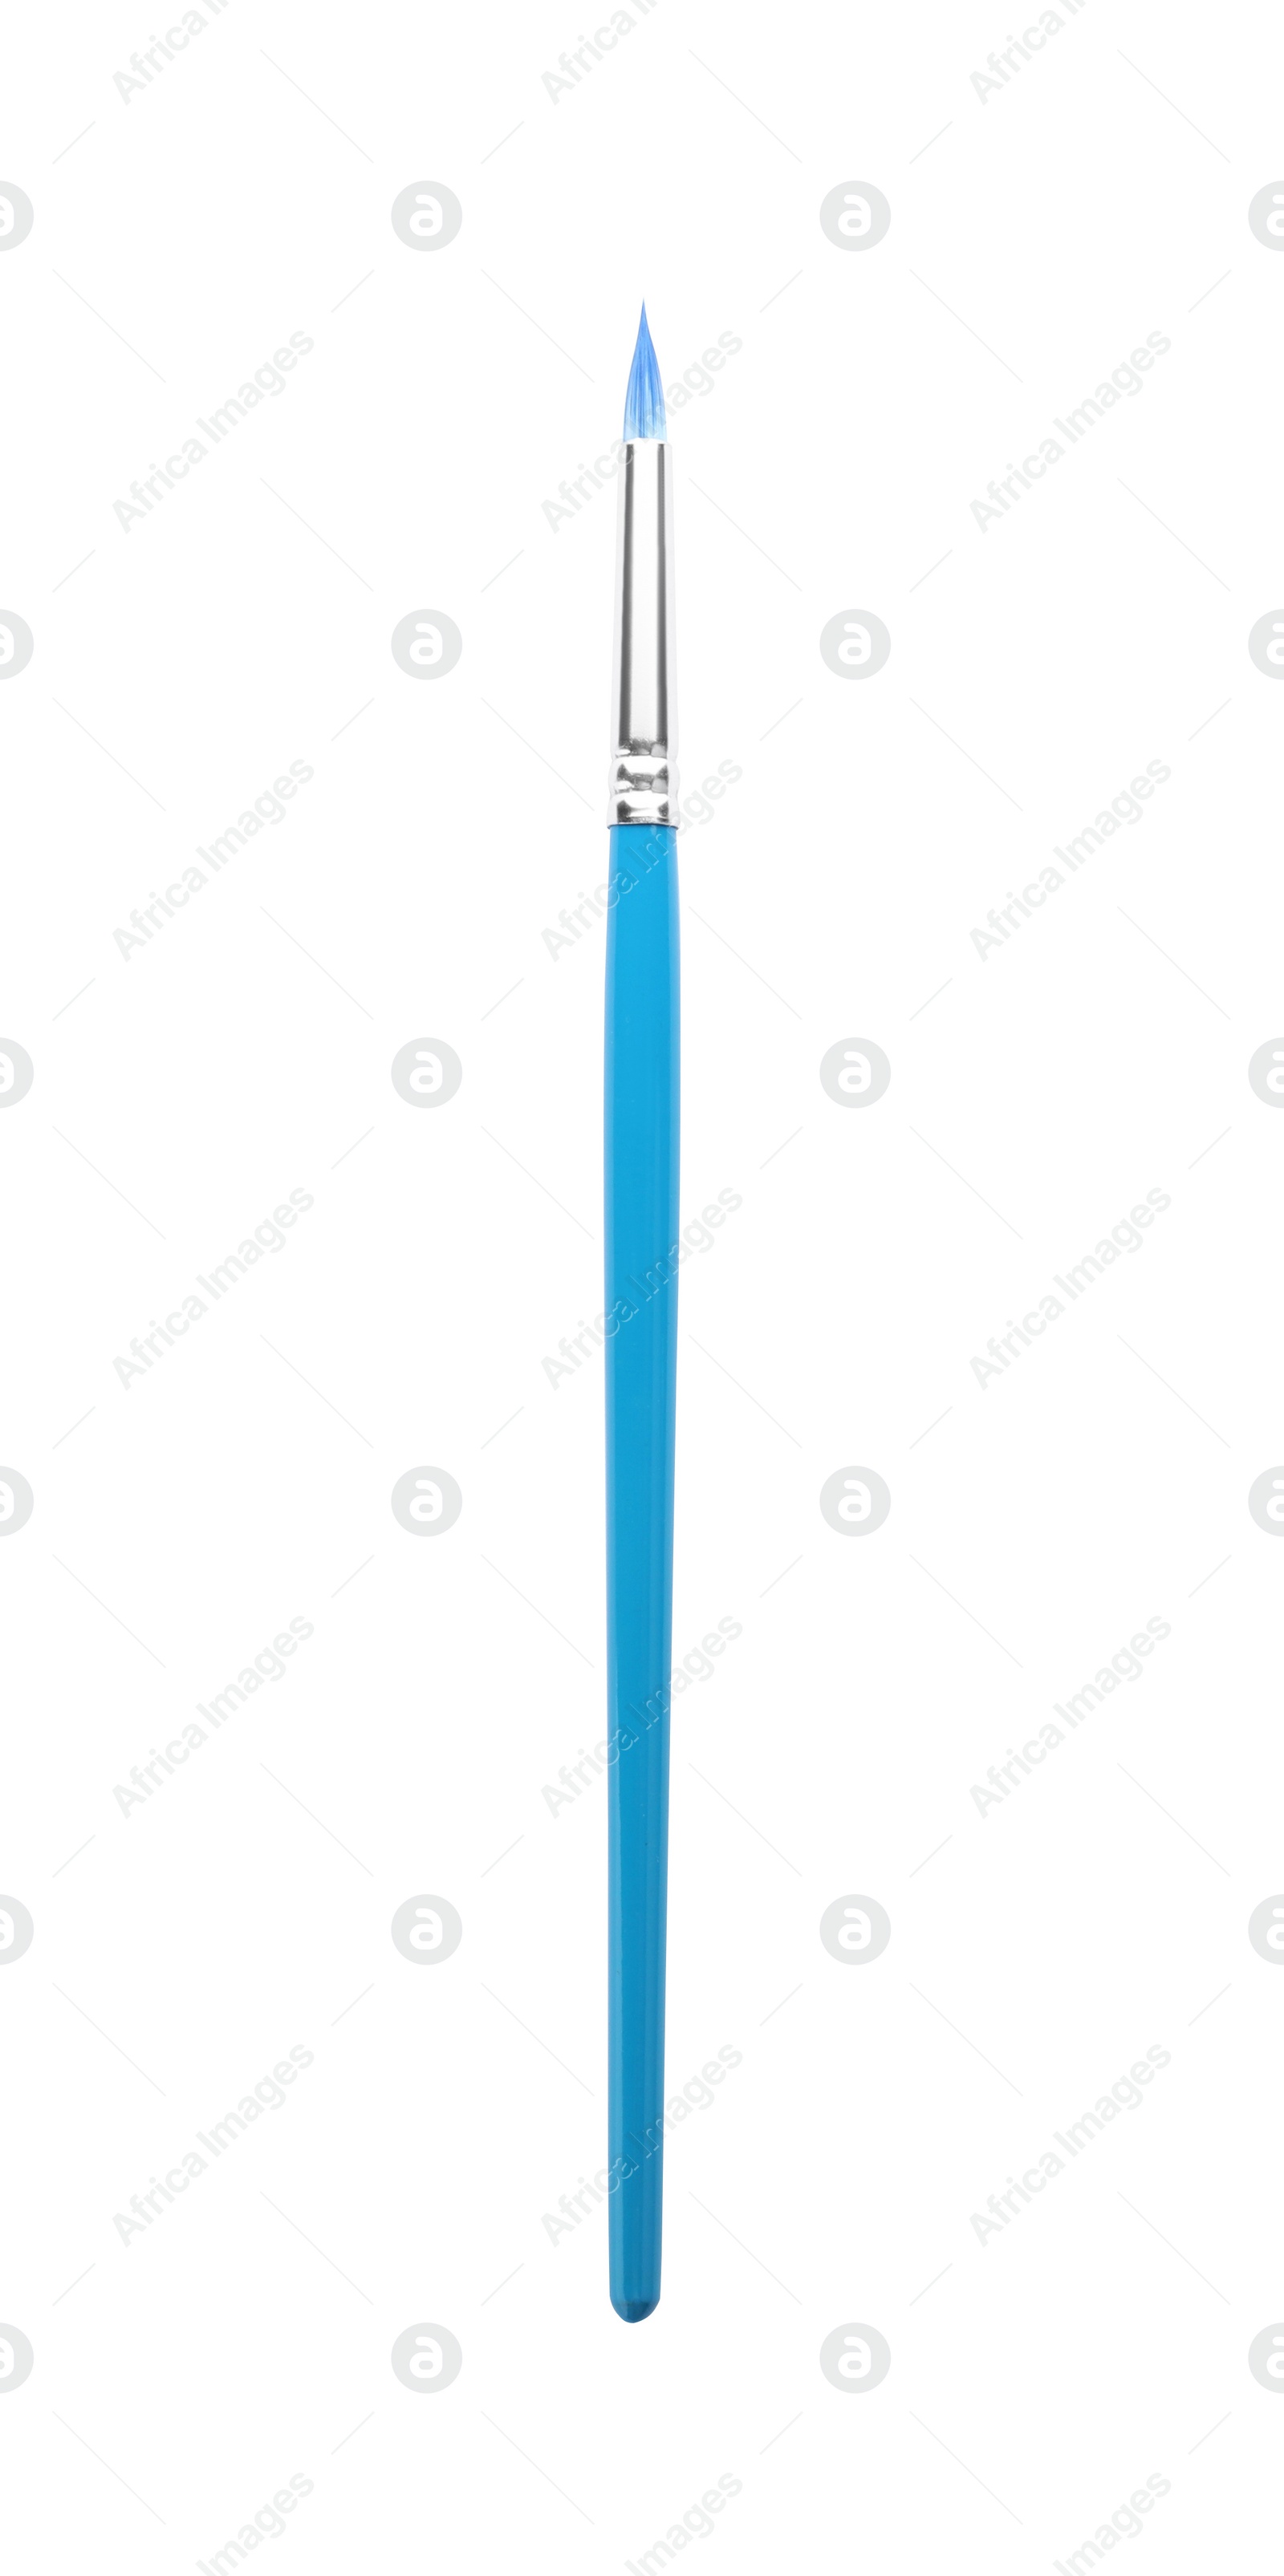 Photo of New brush for painting isolated on white. School stationery